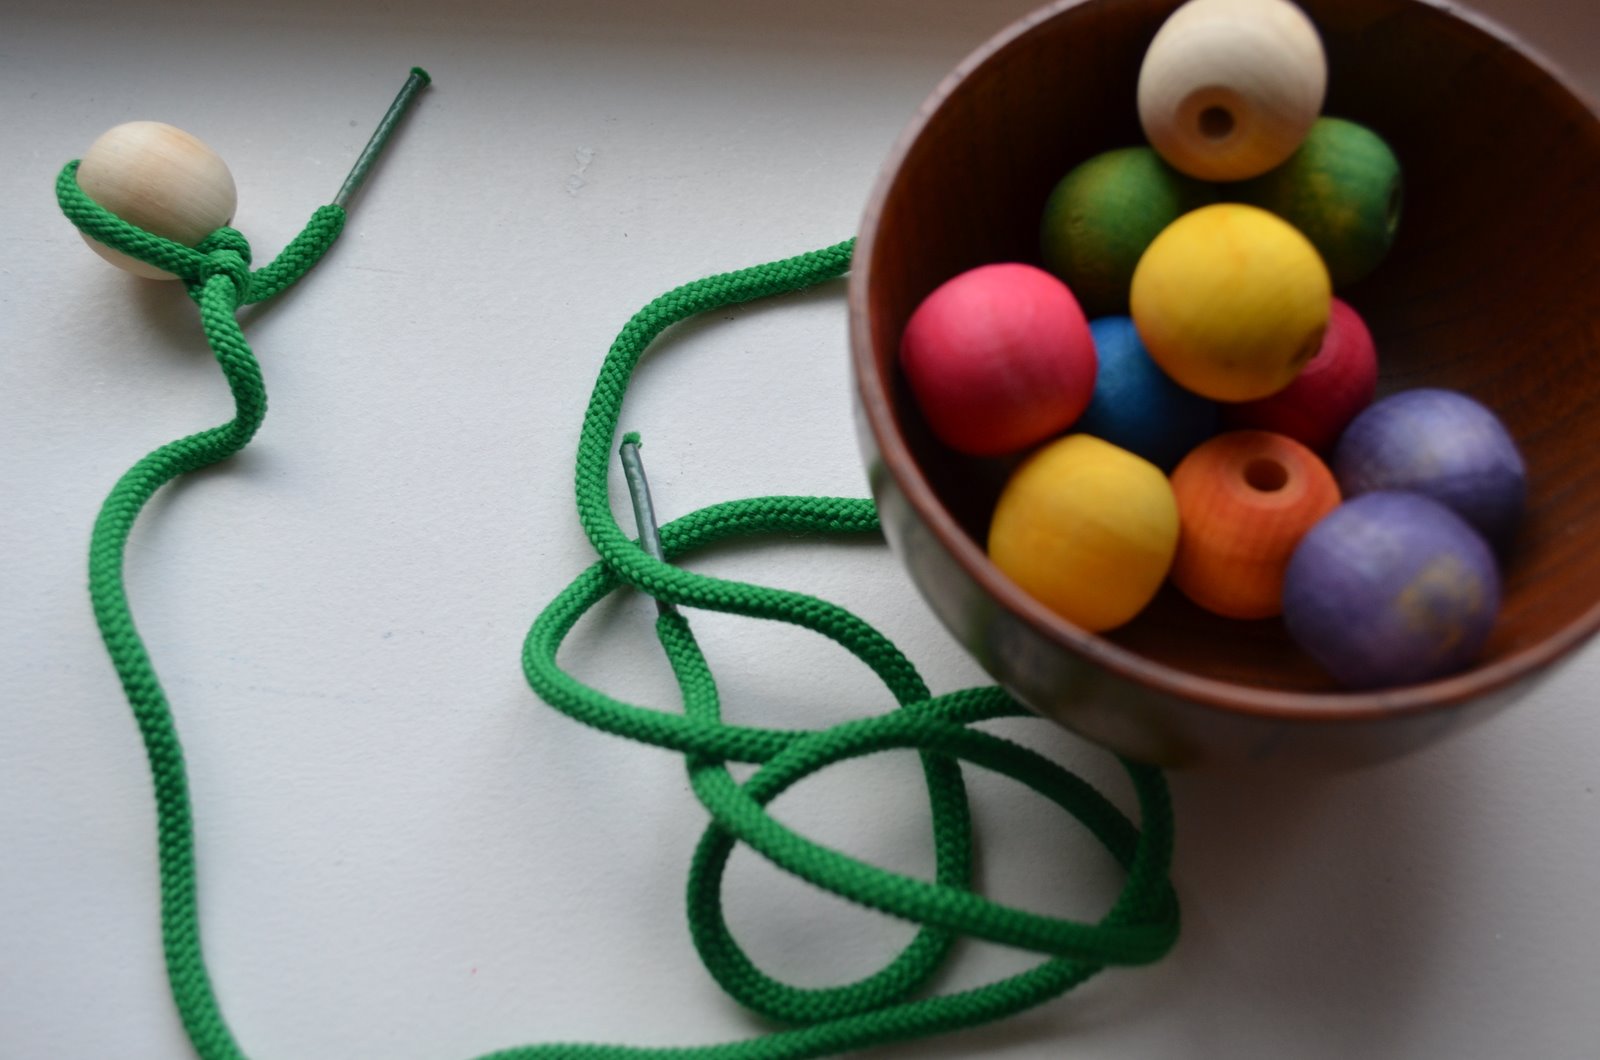 Rainbow Bead Stringing (Photo from The Education of Ours)